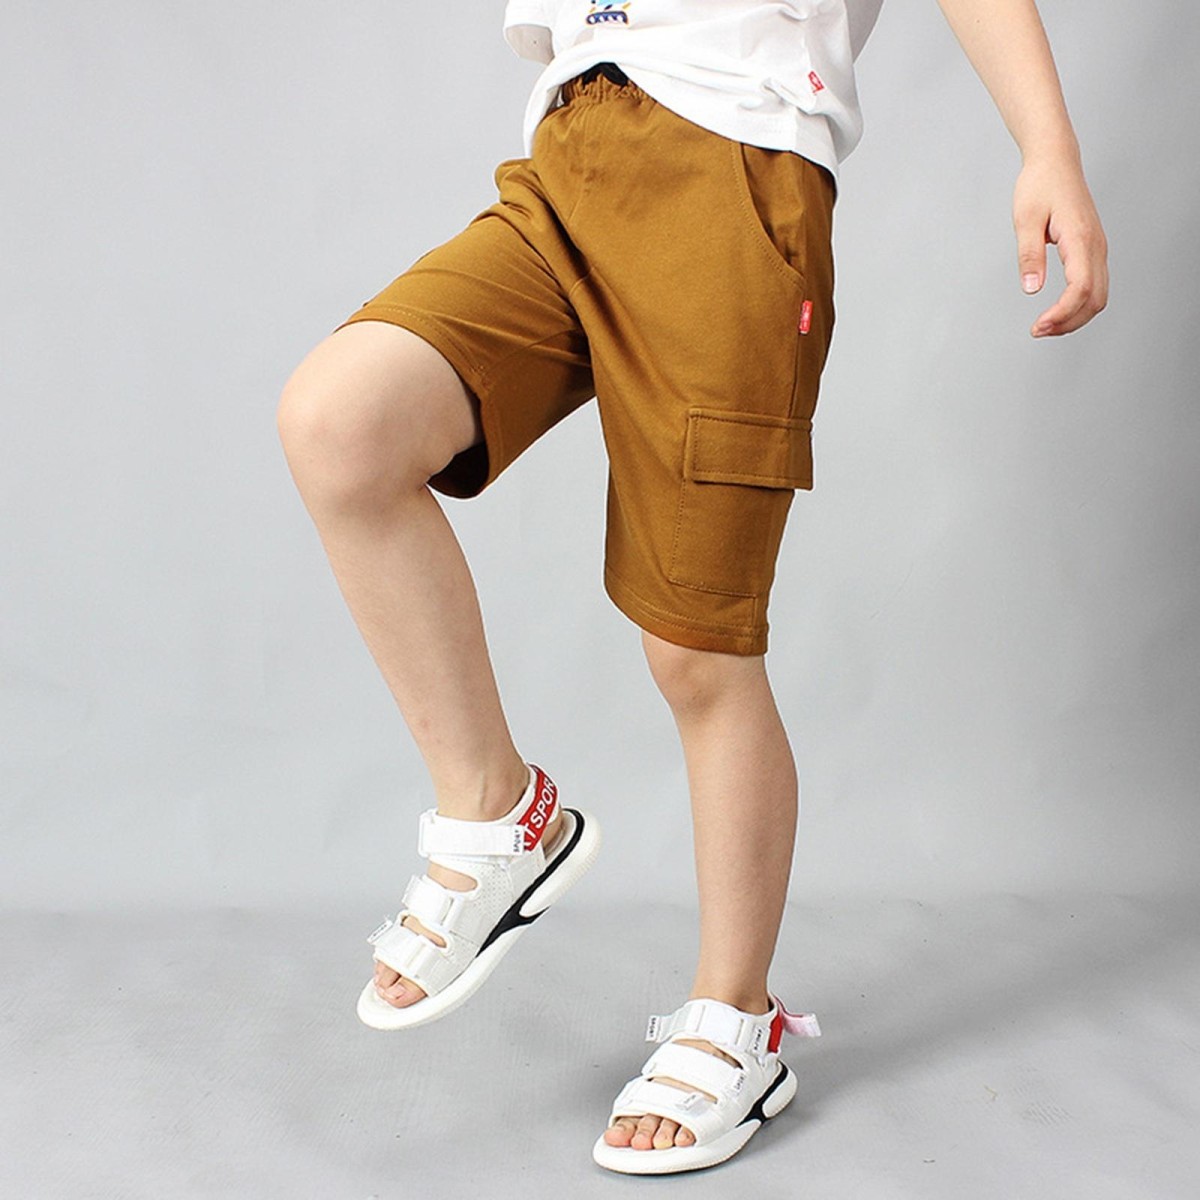 Boys Cotton Casual Overalls Shorts (Color:Chocolate Size:140cm)